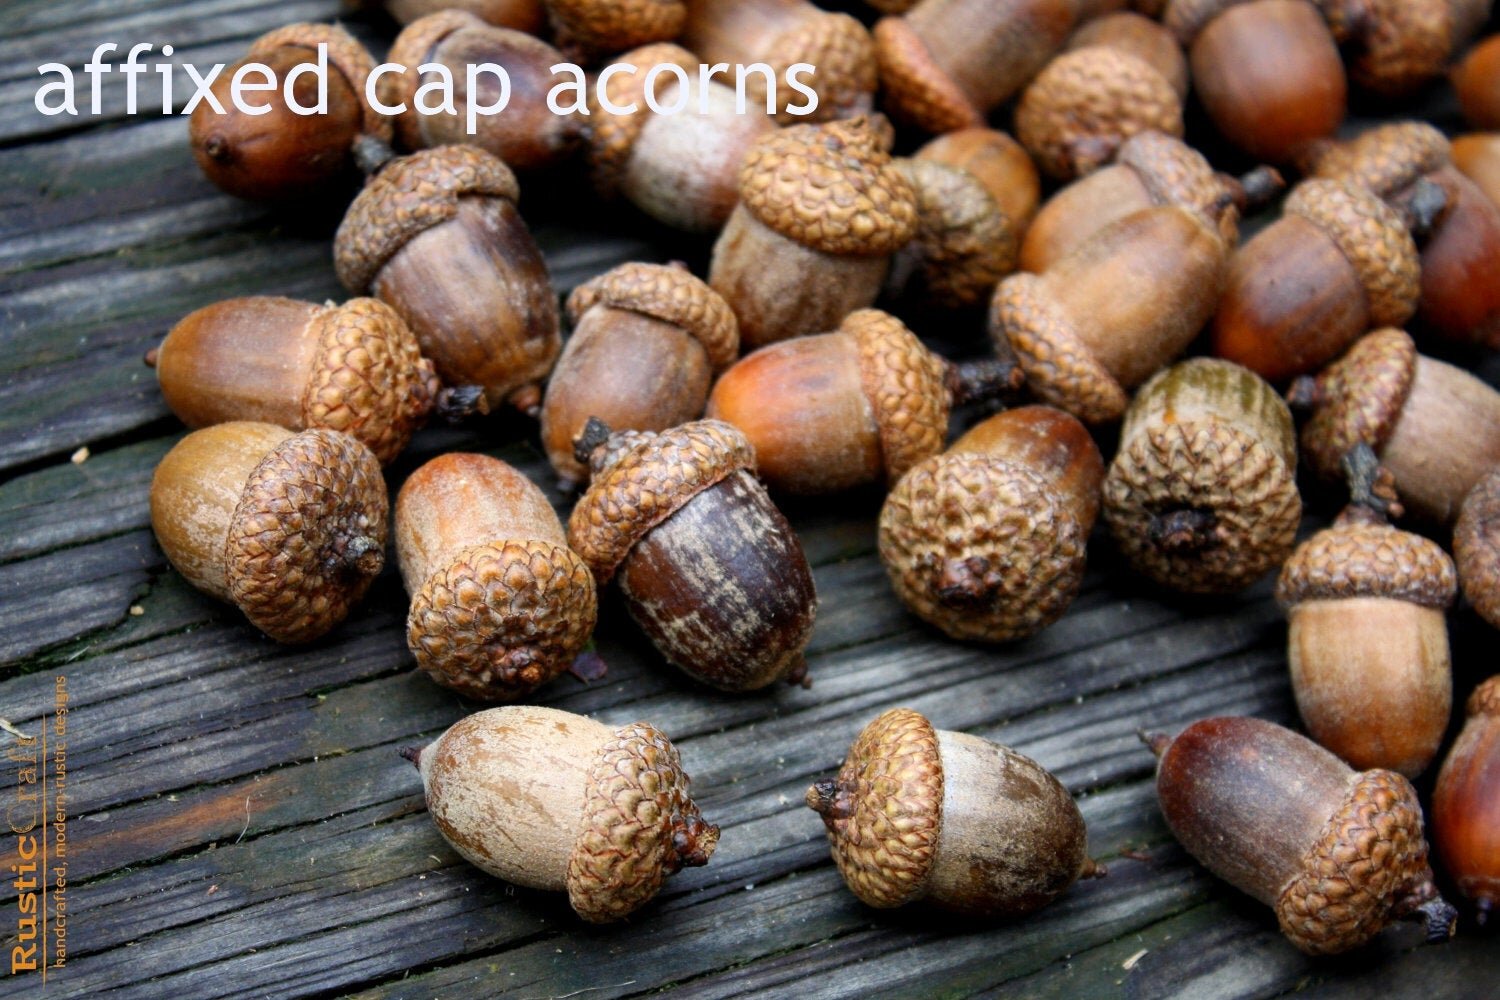 Large Acorns with affixed caps - Natural or Preserved with Shellac - Autumn  decorations, DIY Rustic Wedding supplies - Autumn Wedding- Clean & dried —  Rusticcraft Designs